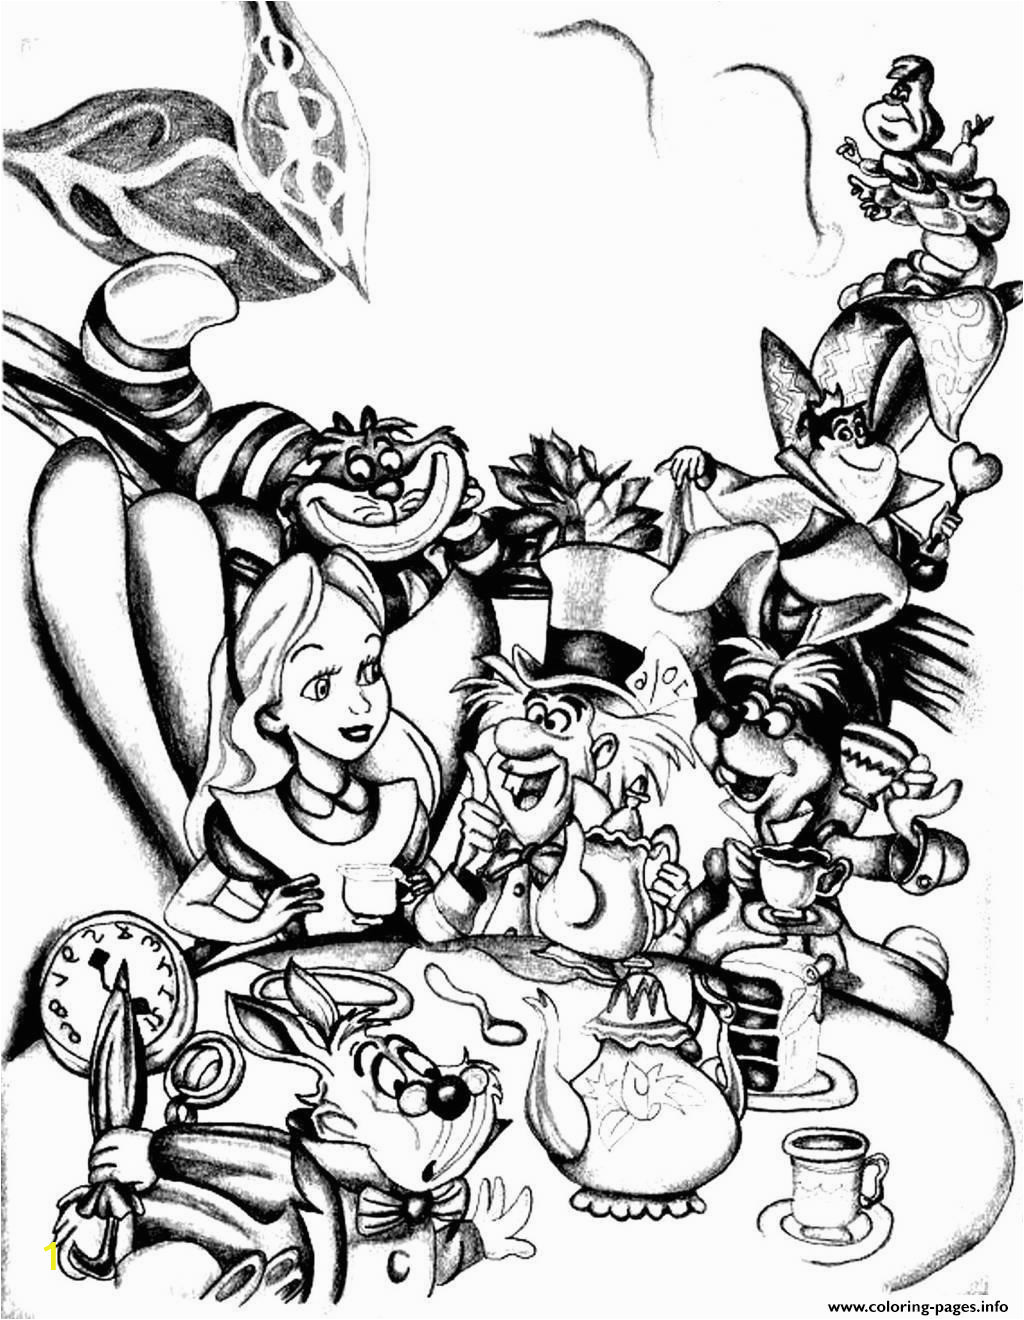 trippy alice in wonderland coloring pages